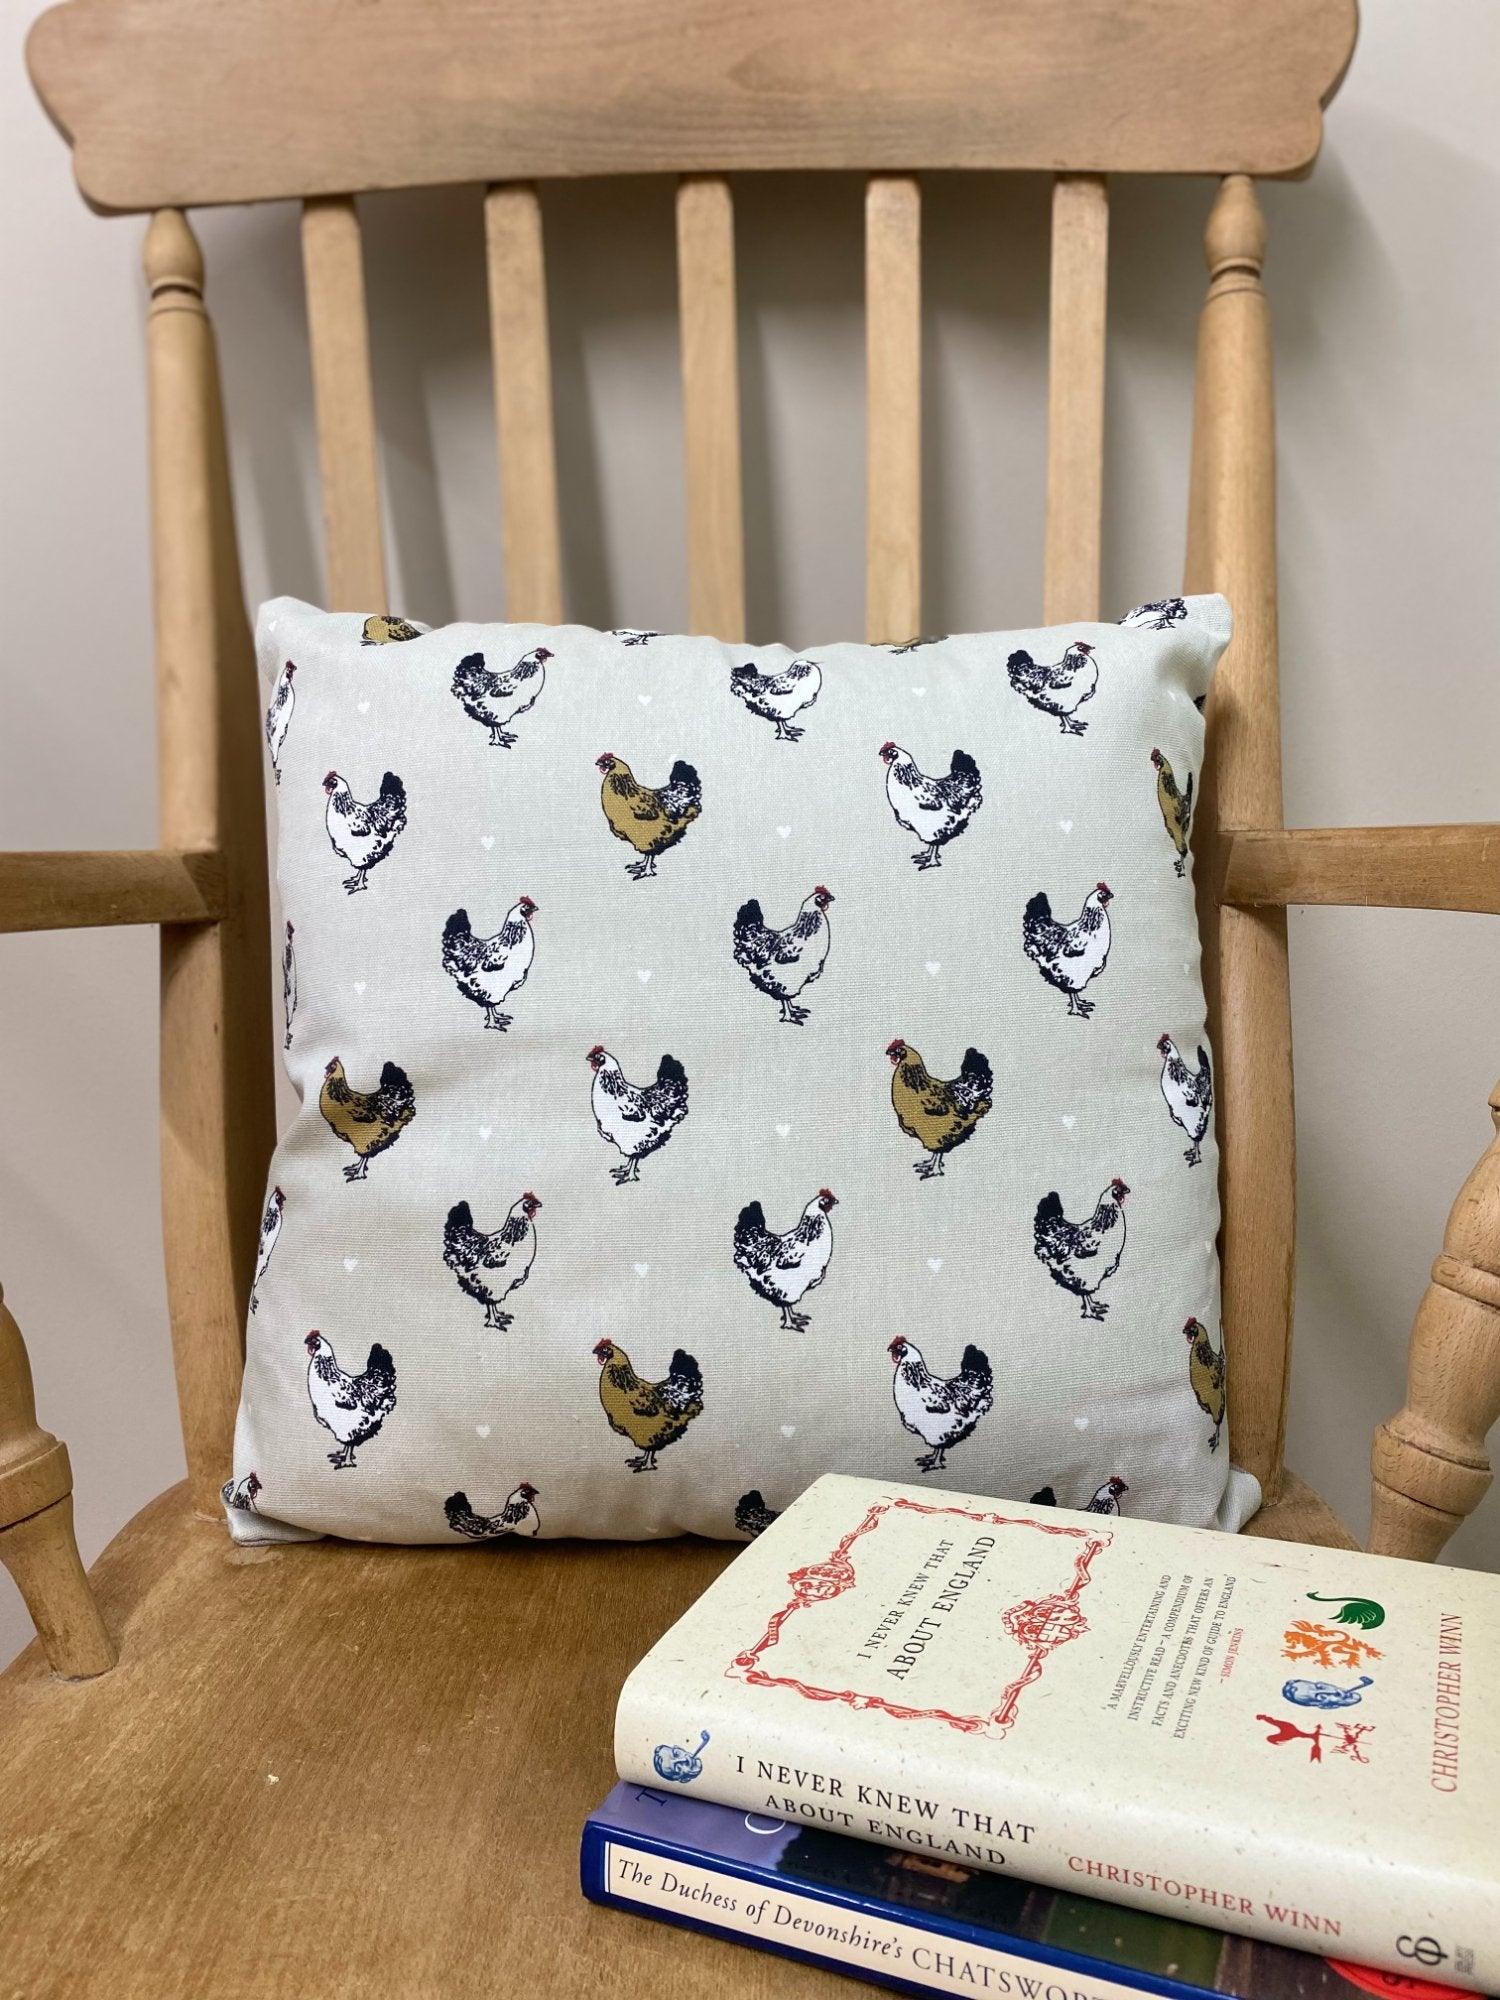 Scatter Cushion With A Chicken Print Design - £22.99 - Throw Pillows 